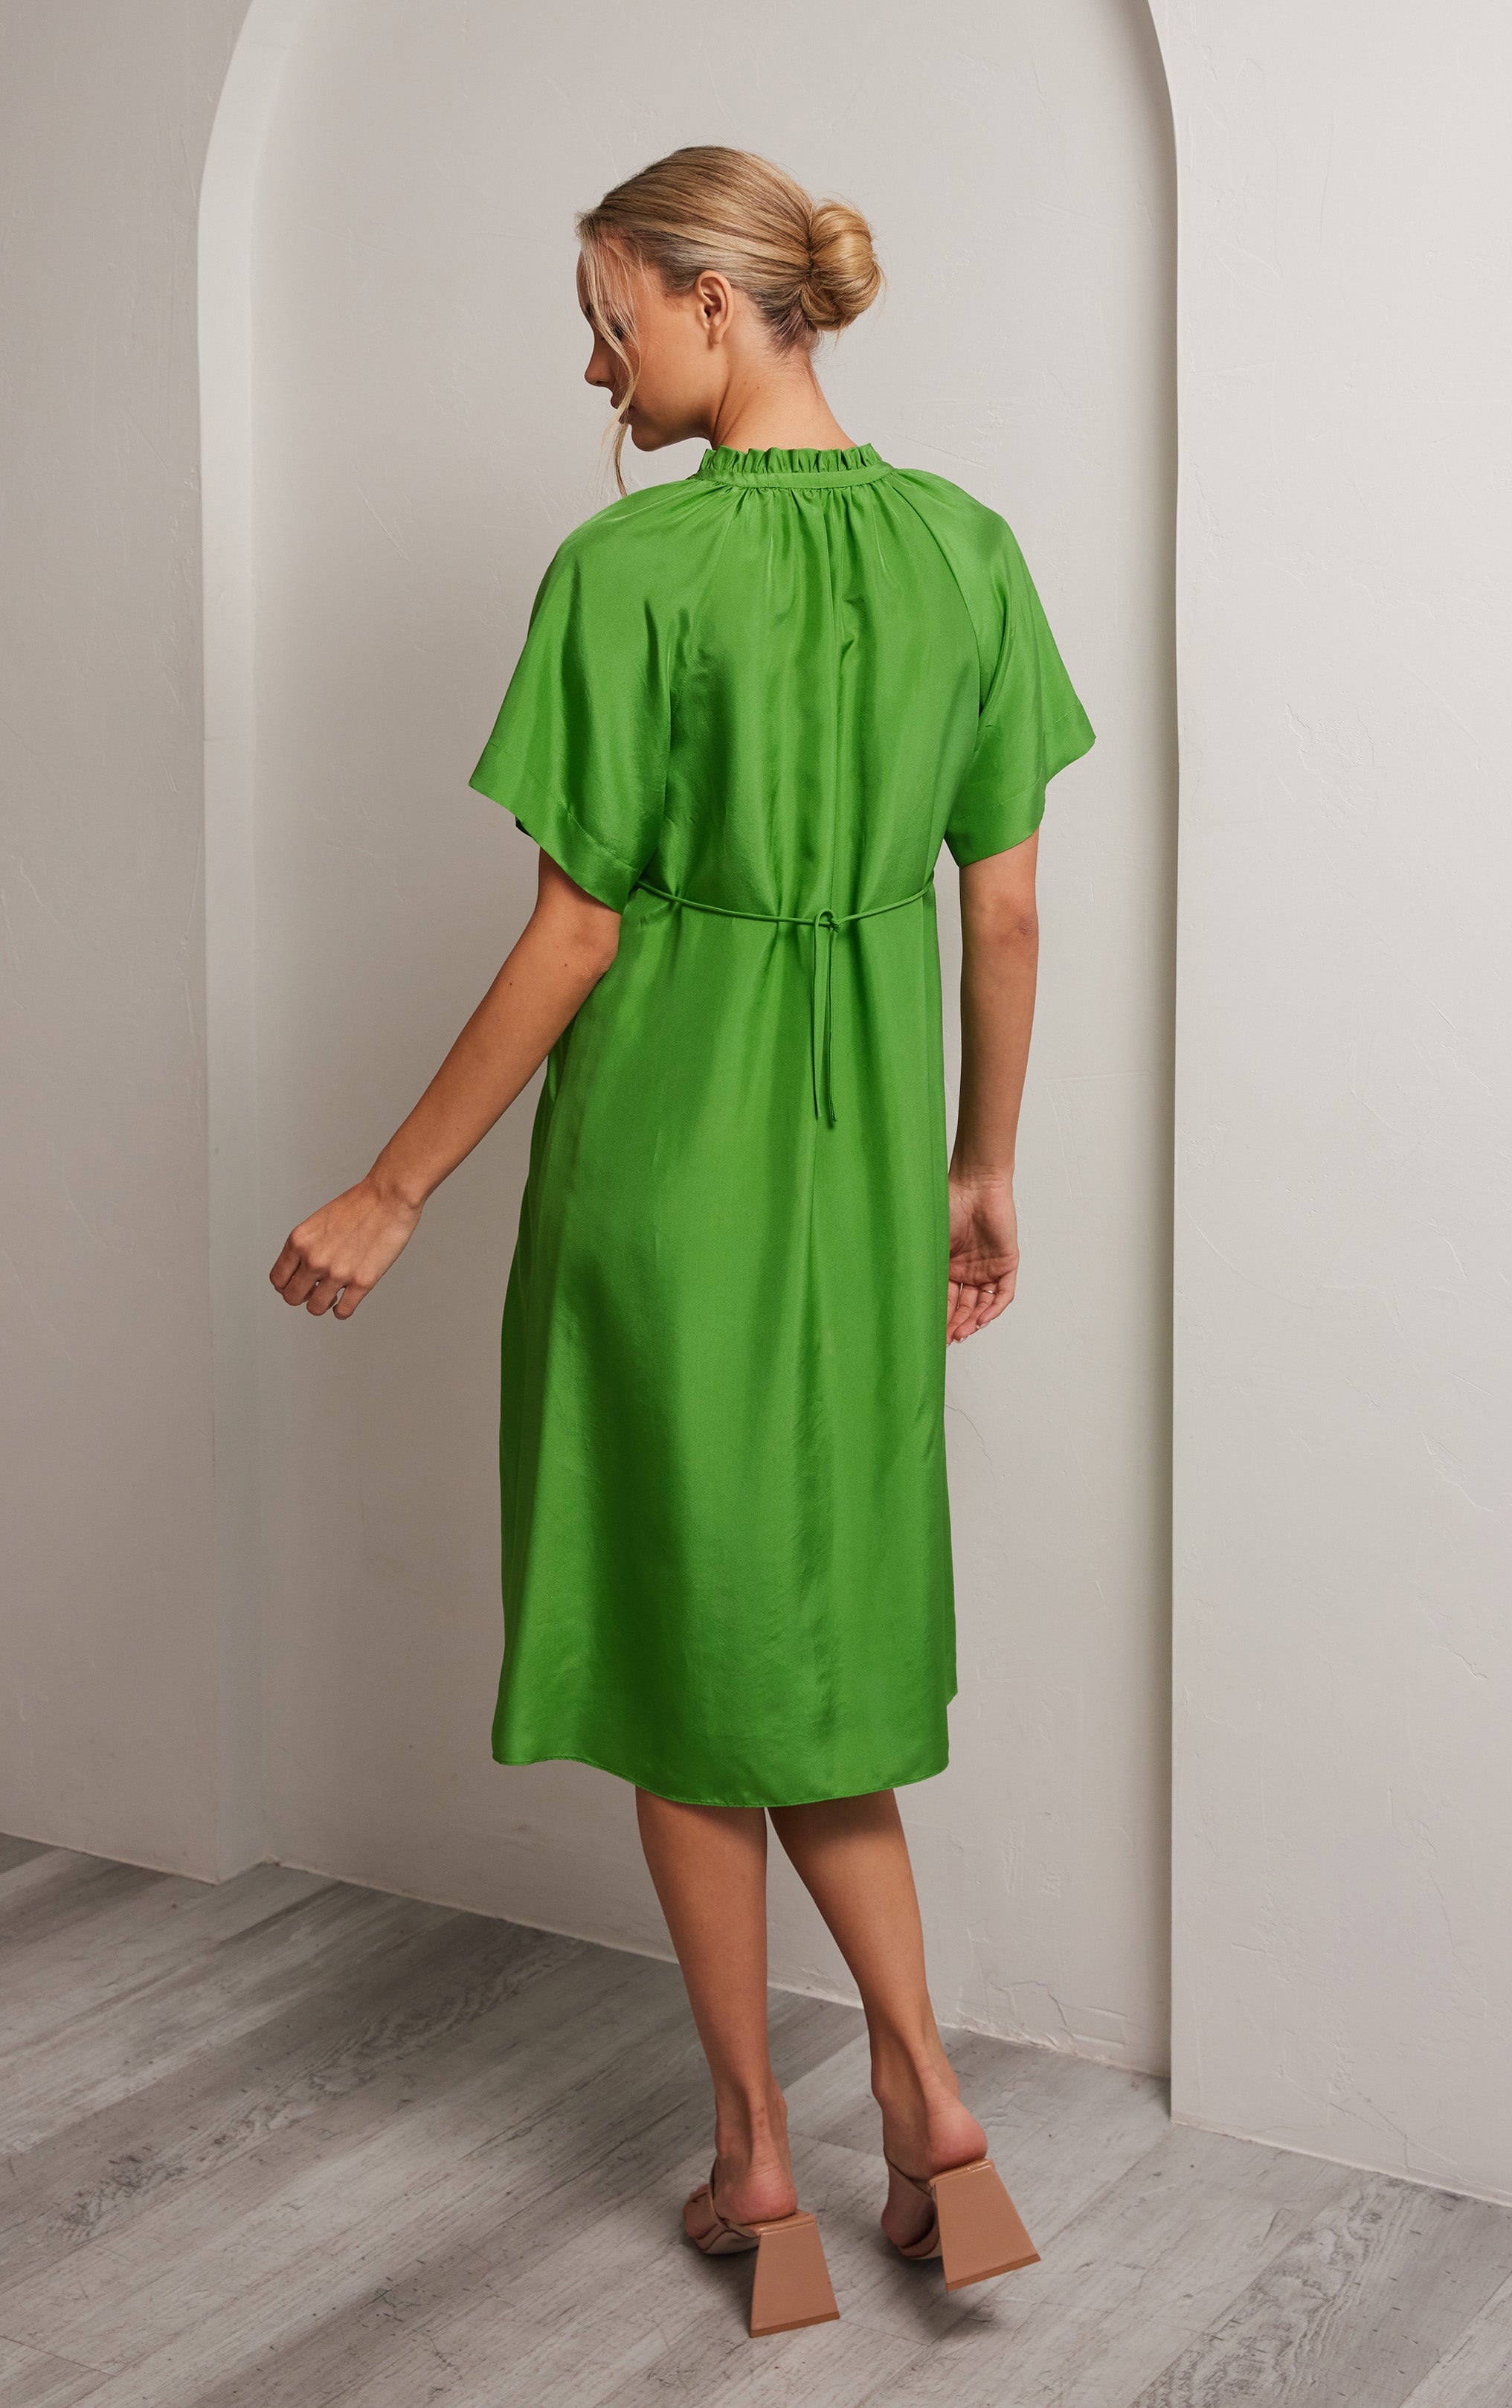 back view of woman wearing green short sleeved silk dress with ruffled neck trim and rusched neck